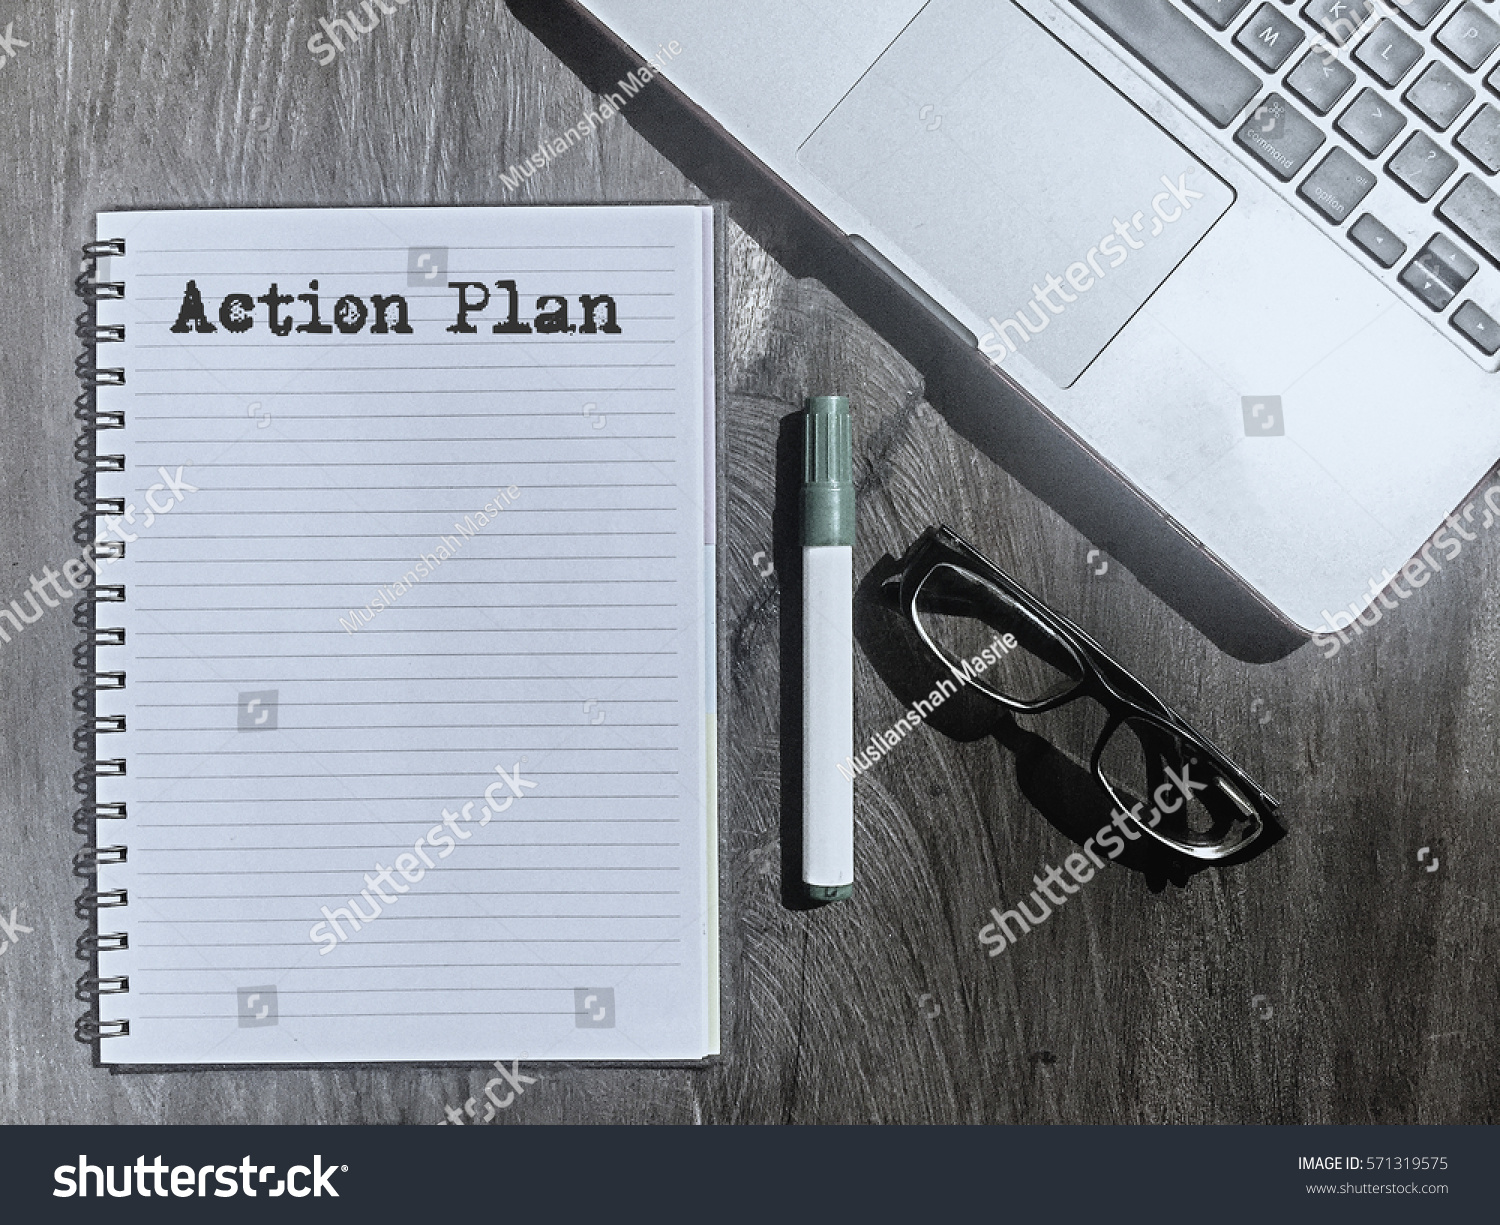 Action Plan, Typed Words On a handbook with note book, marker pen and notebook. Vintage and classic background mood with noise. #571319575